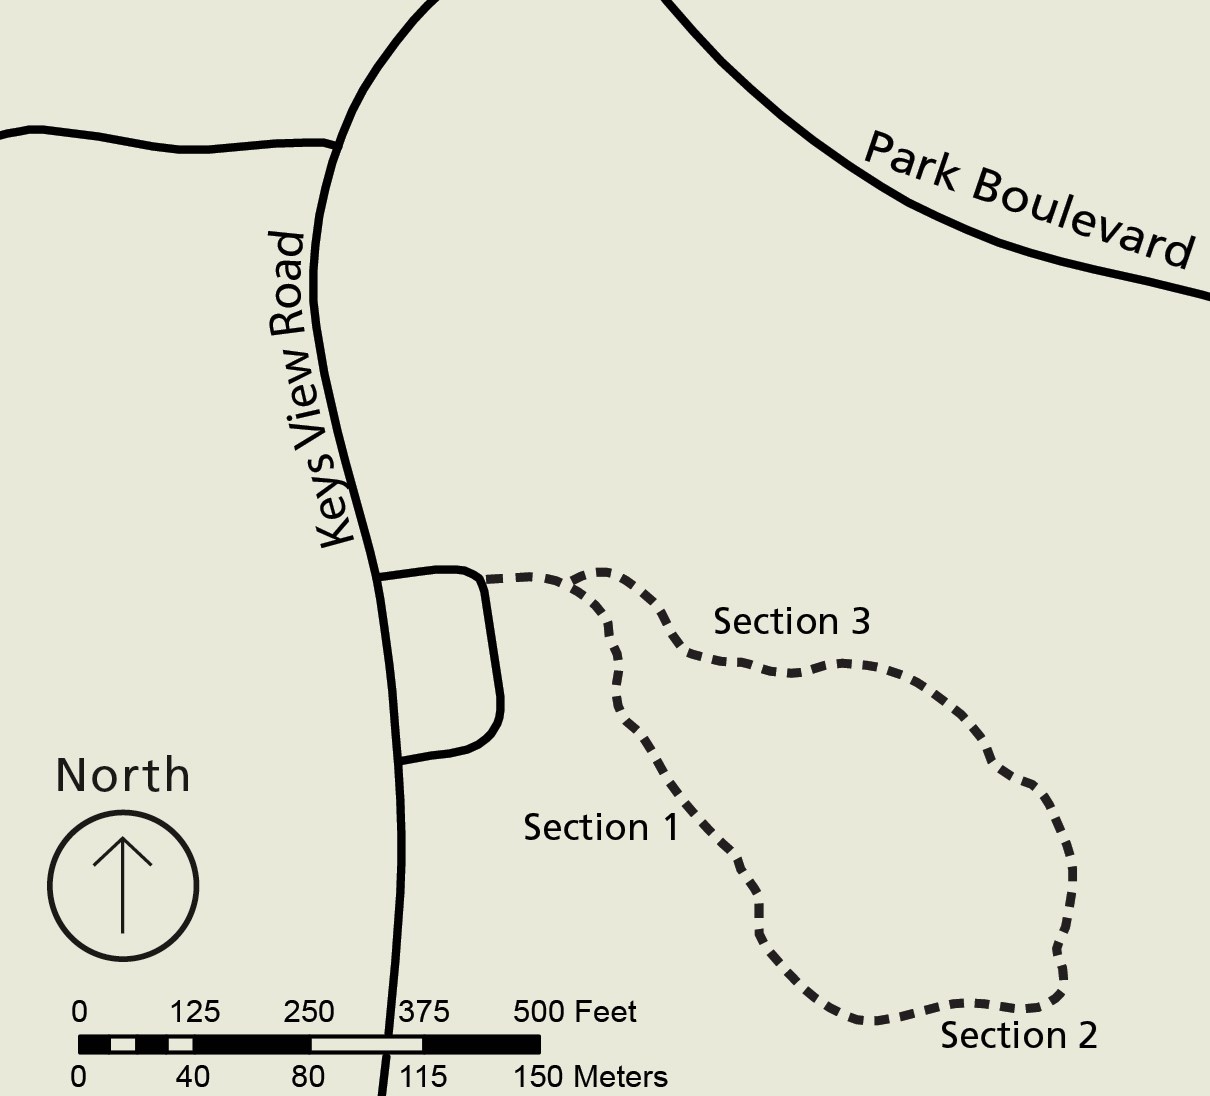 Map of the Cap Rock area. Keys View Road cuts through north-south with a small loop off to the east indicating the parking lot. Off the parking lot there is a dashed-line loop indicating the trail.